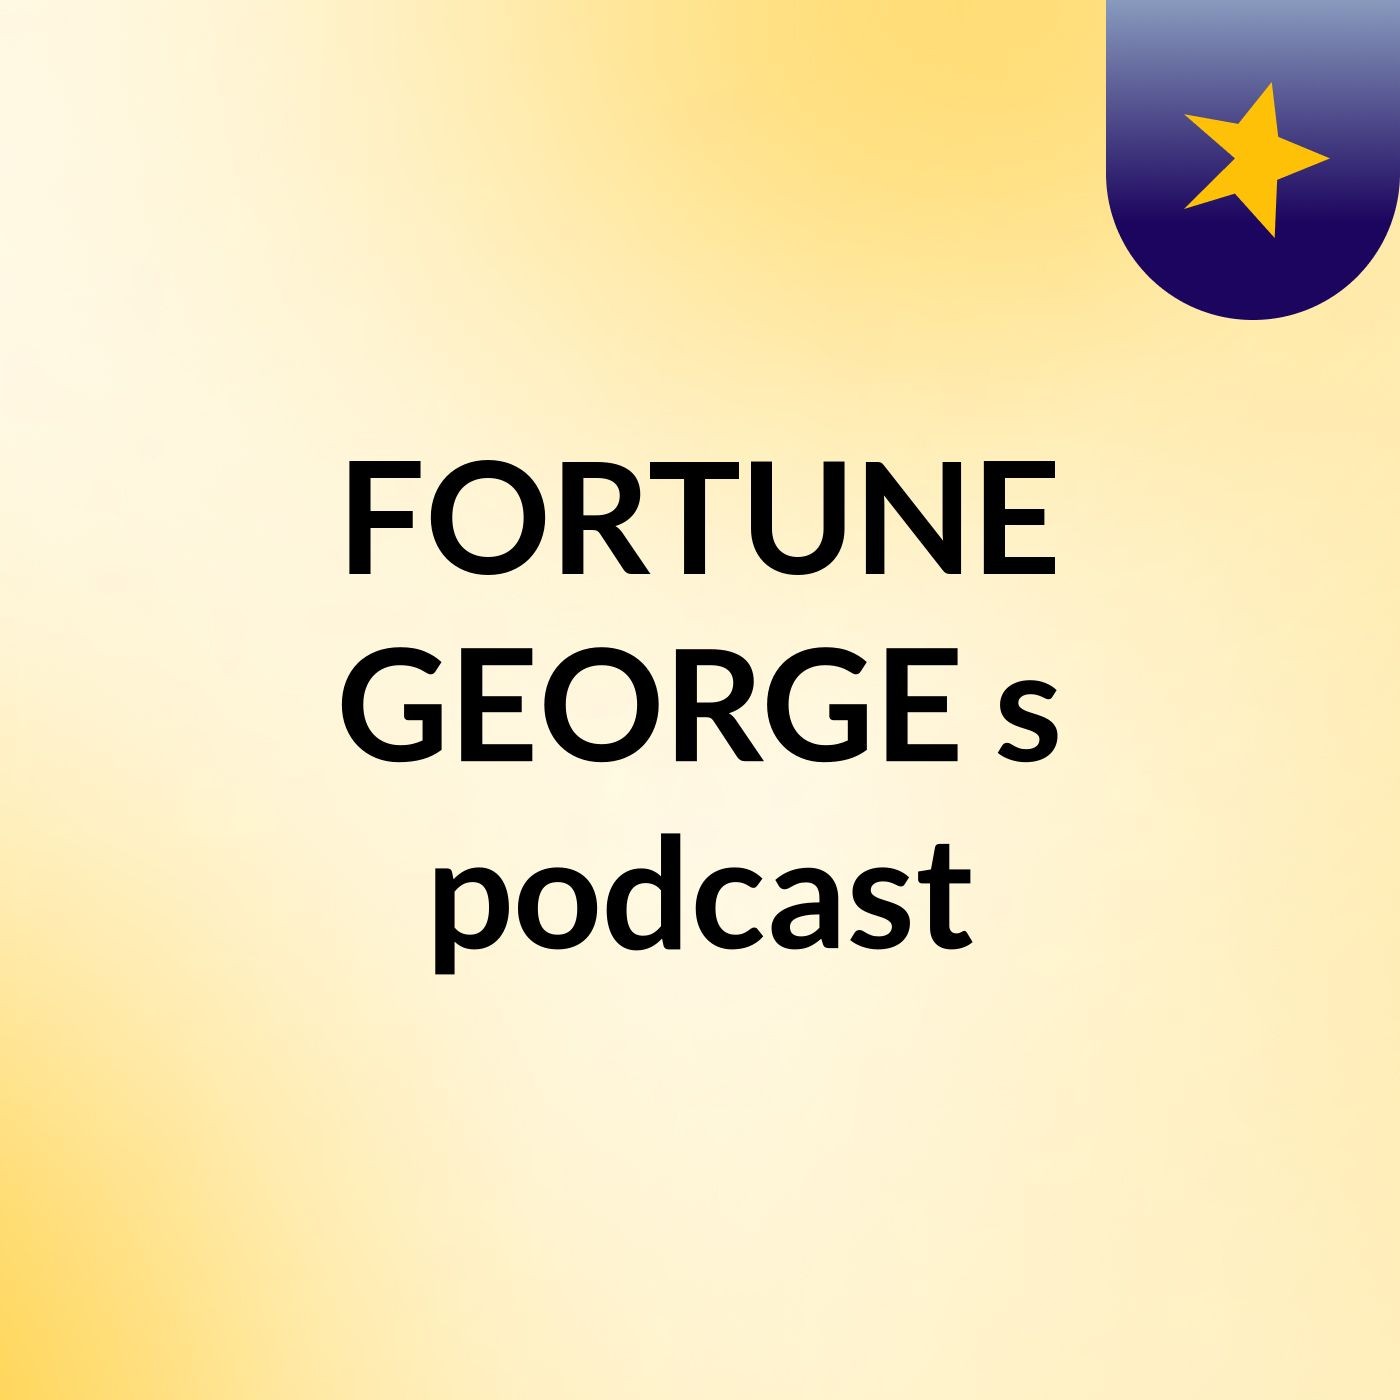 FORTUNE GEORGE's podcast